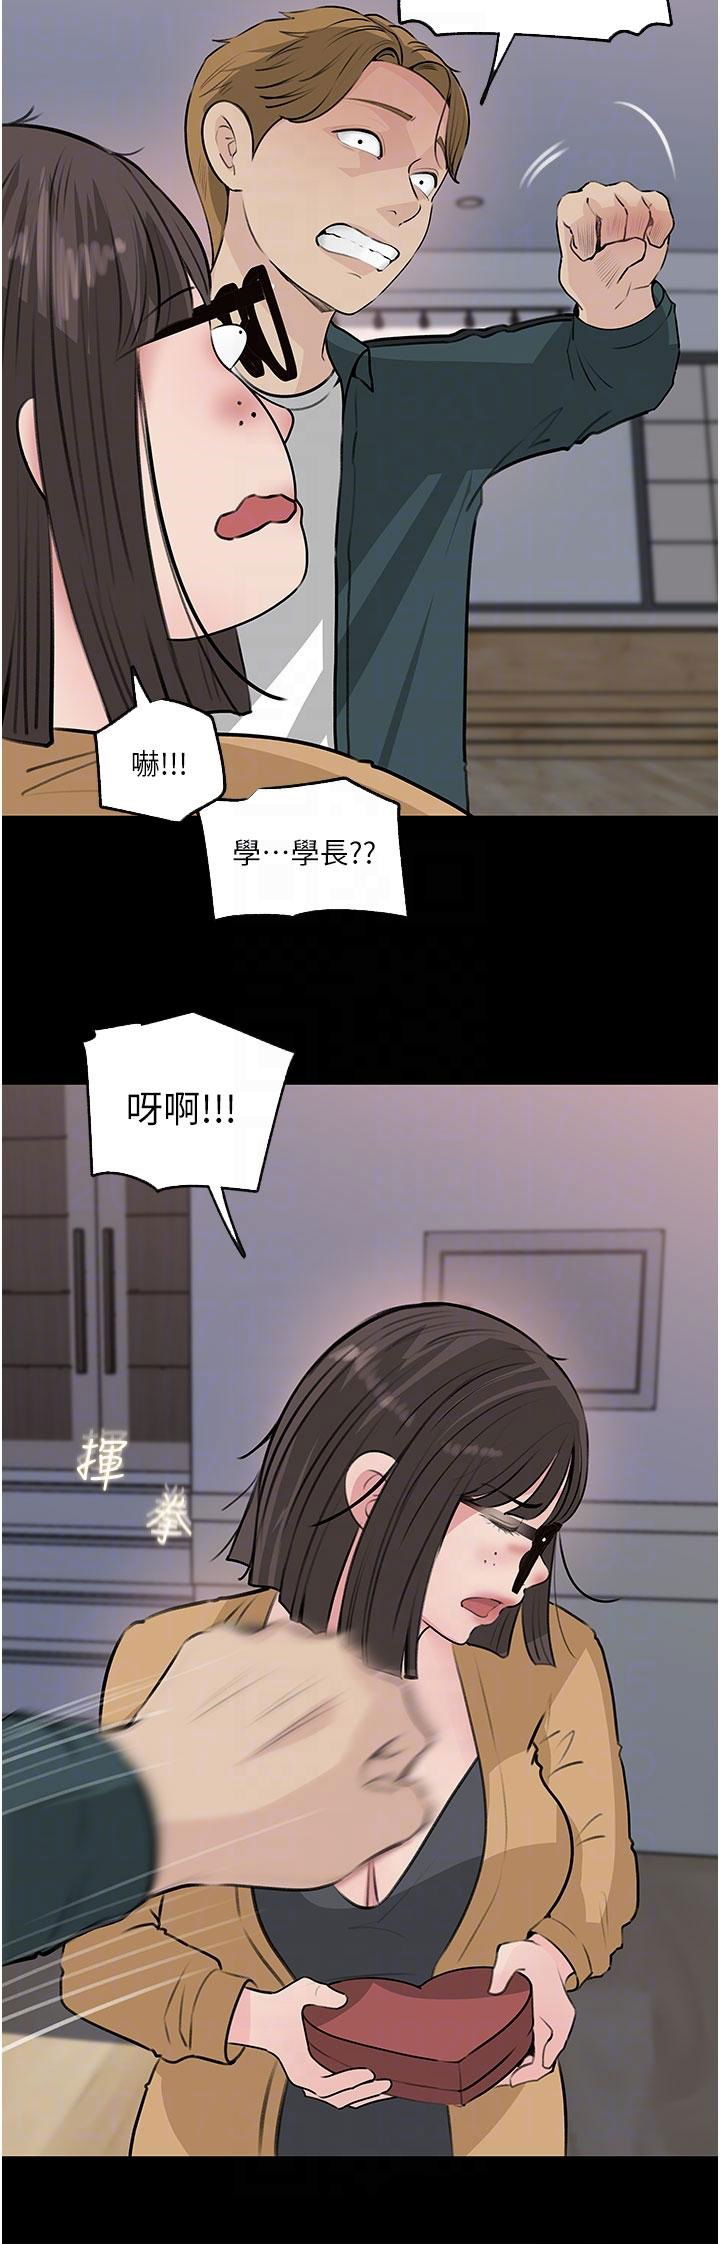 in-my-sister-in-law-raw-chap-36-3